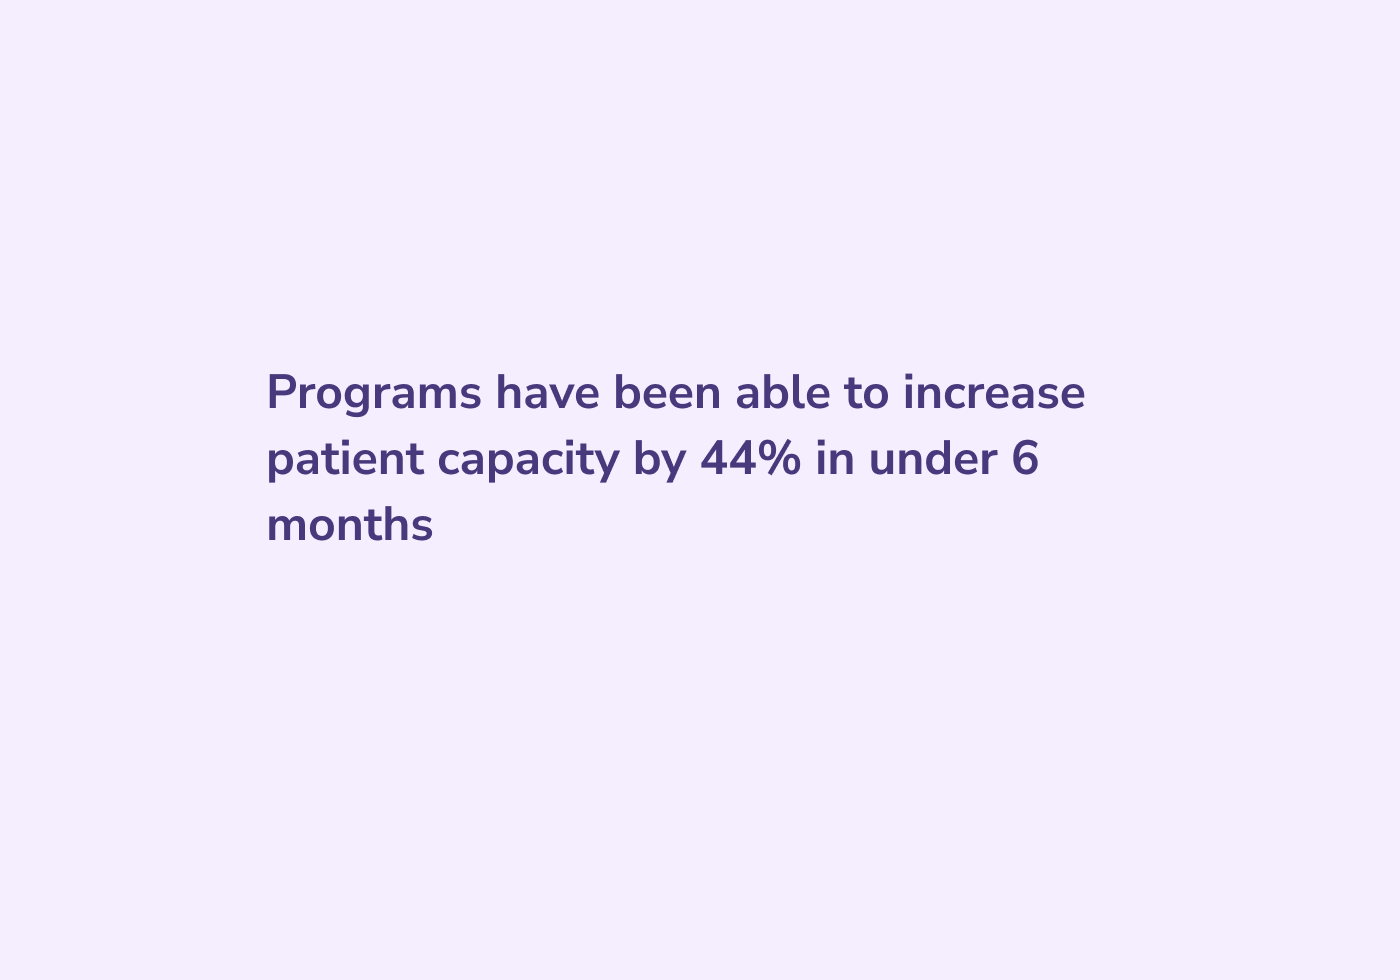 Statistic stating that programs have been able to increase patient capacity by 44% in under 6 months